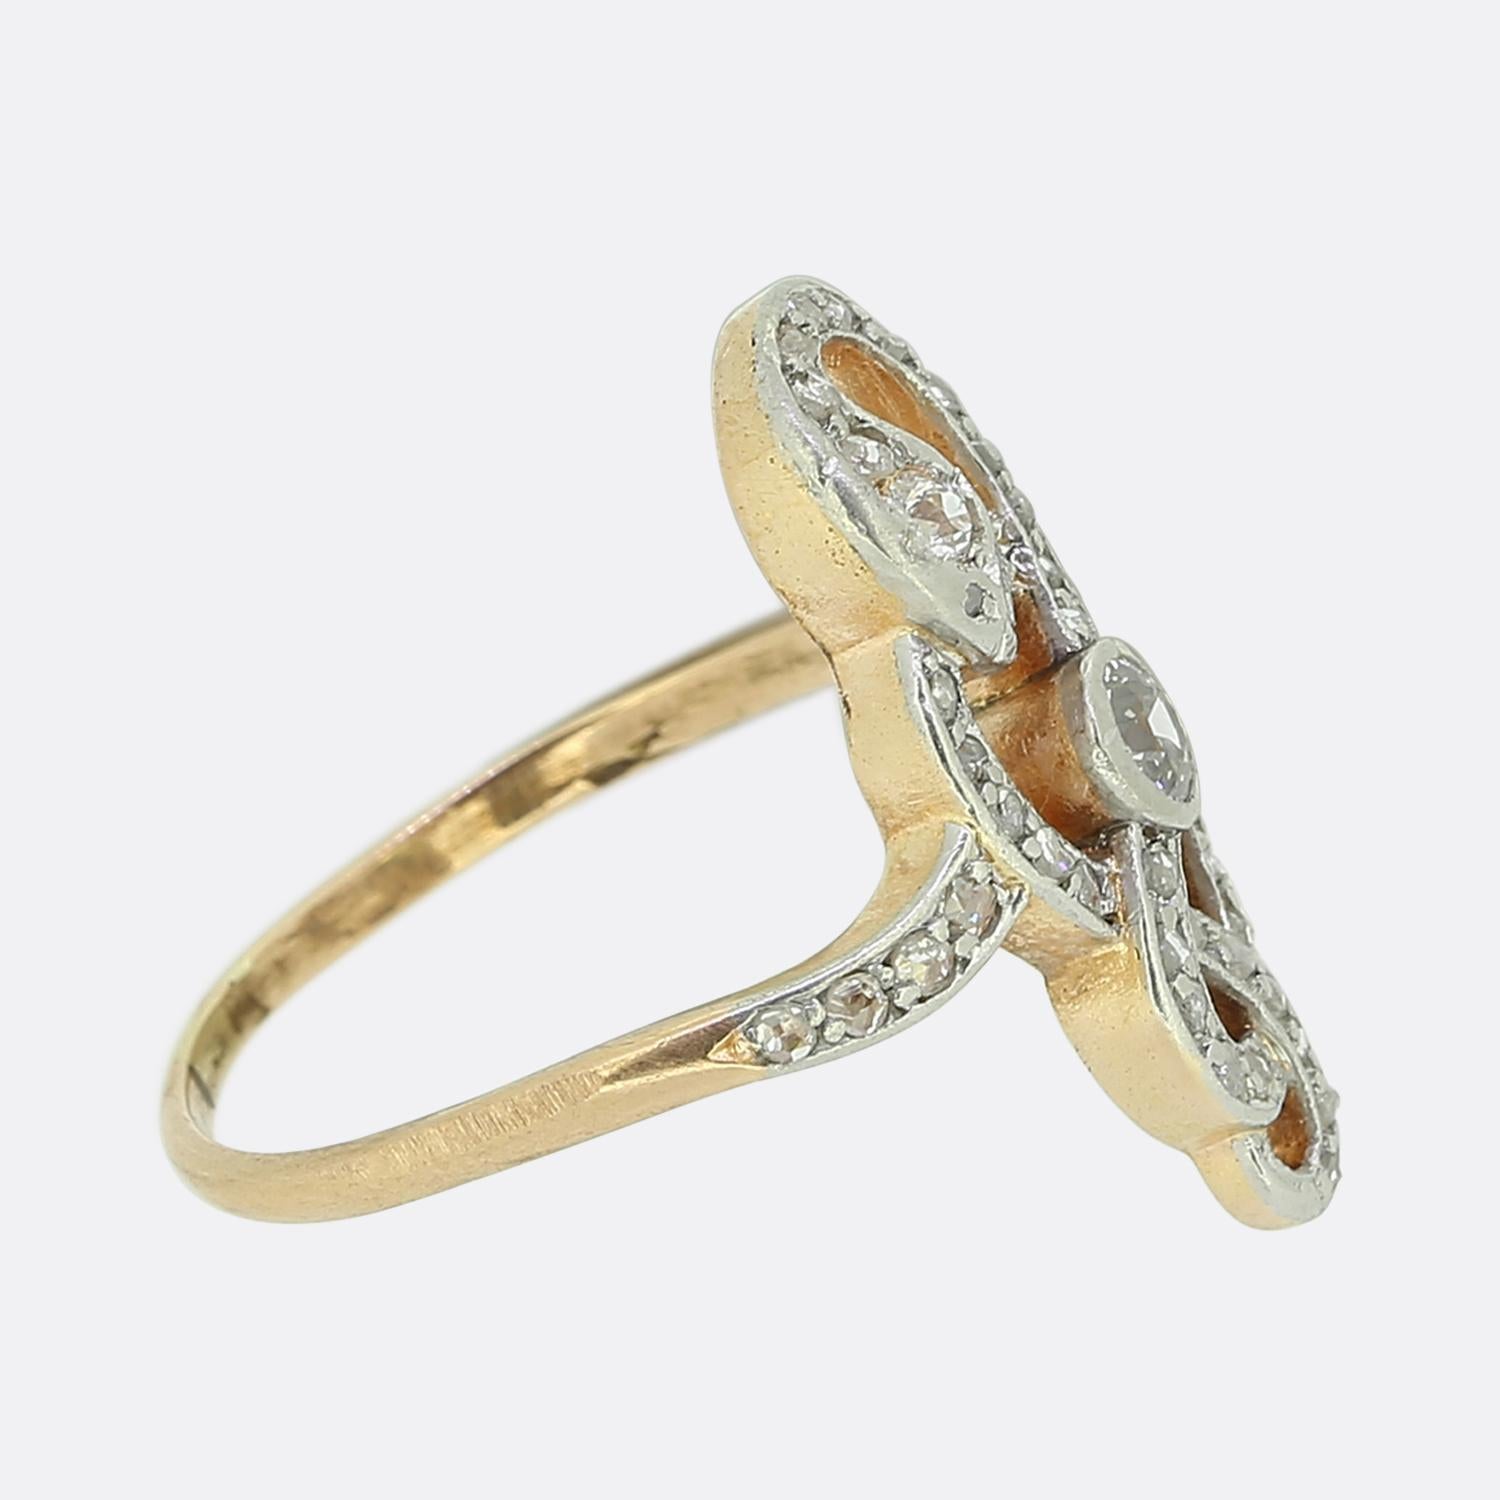 Here we have an excellently crafted diamond snake ring dating back to the Edwardian period. A single round faceted old cut diamond sits rub-over set at the centre of an open face amidst the swirling serpent design. The snake itself has been set with